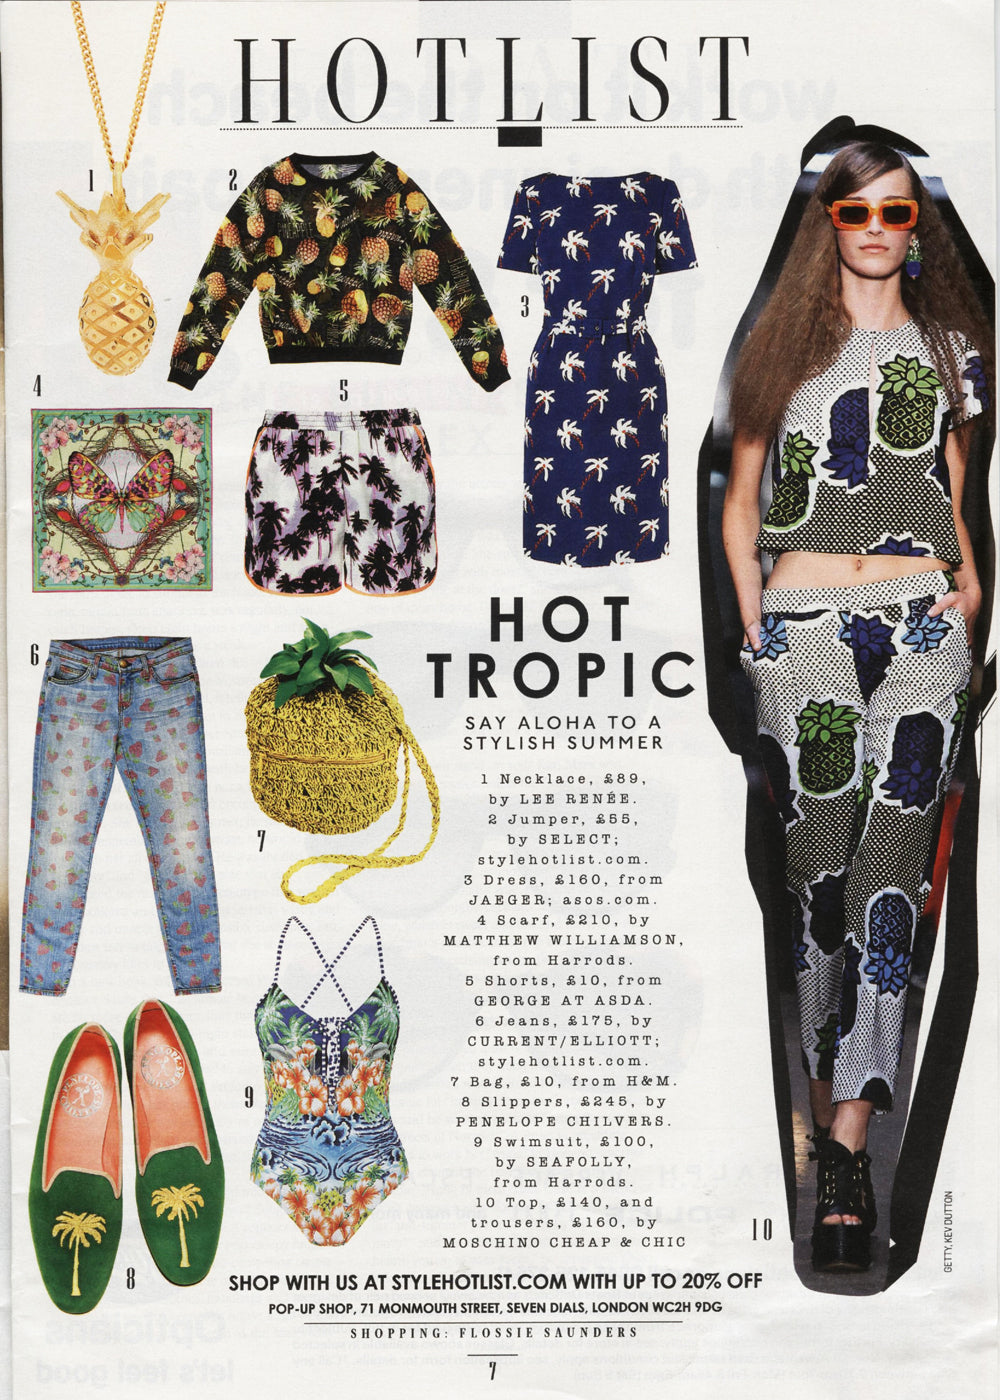 Pineapple Necklace No 1 in Sunday Times Style Magazine Hotlist!!